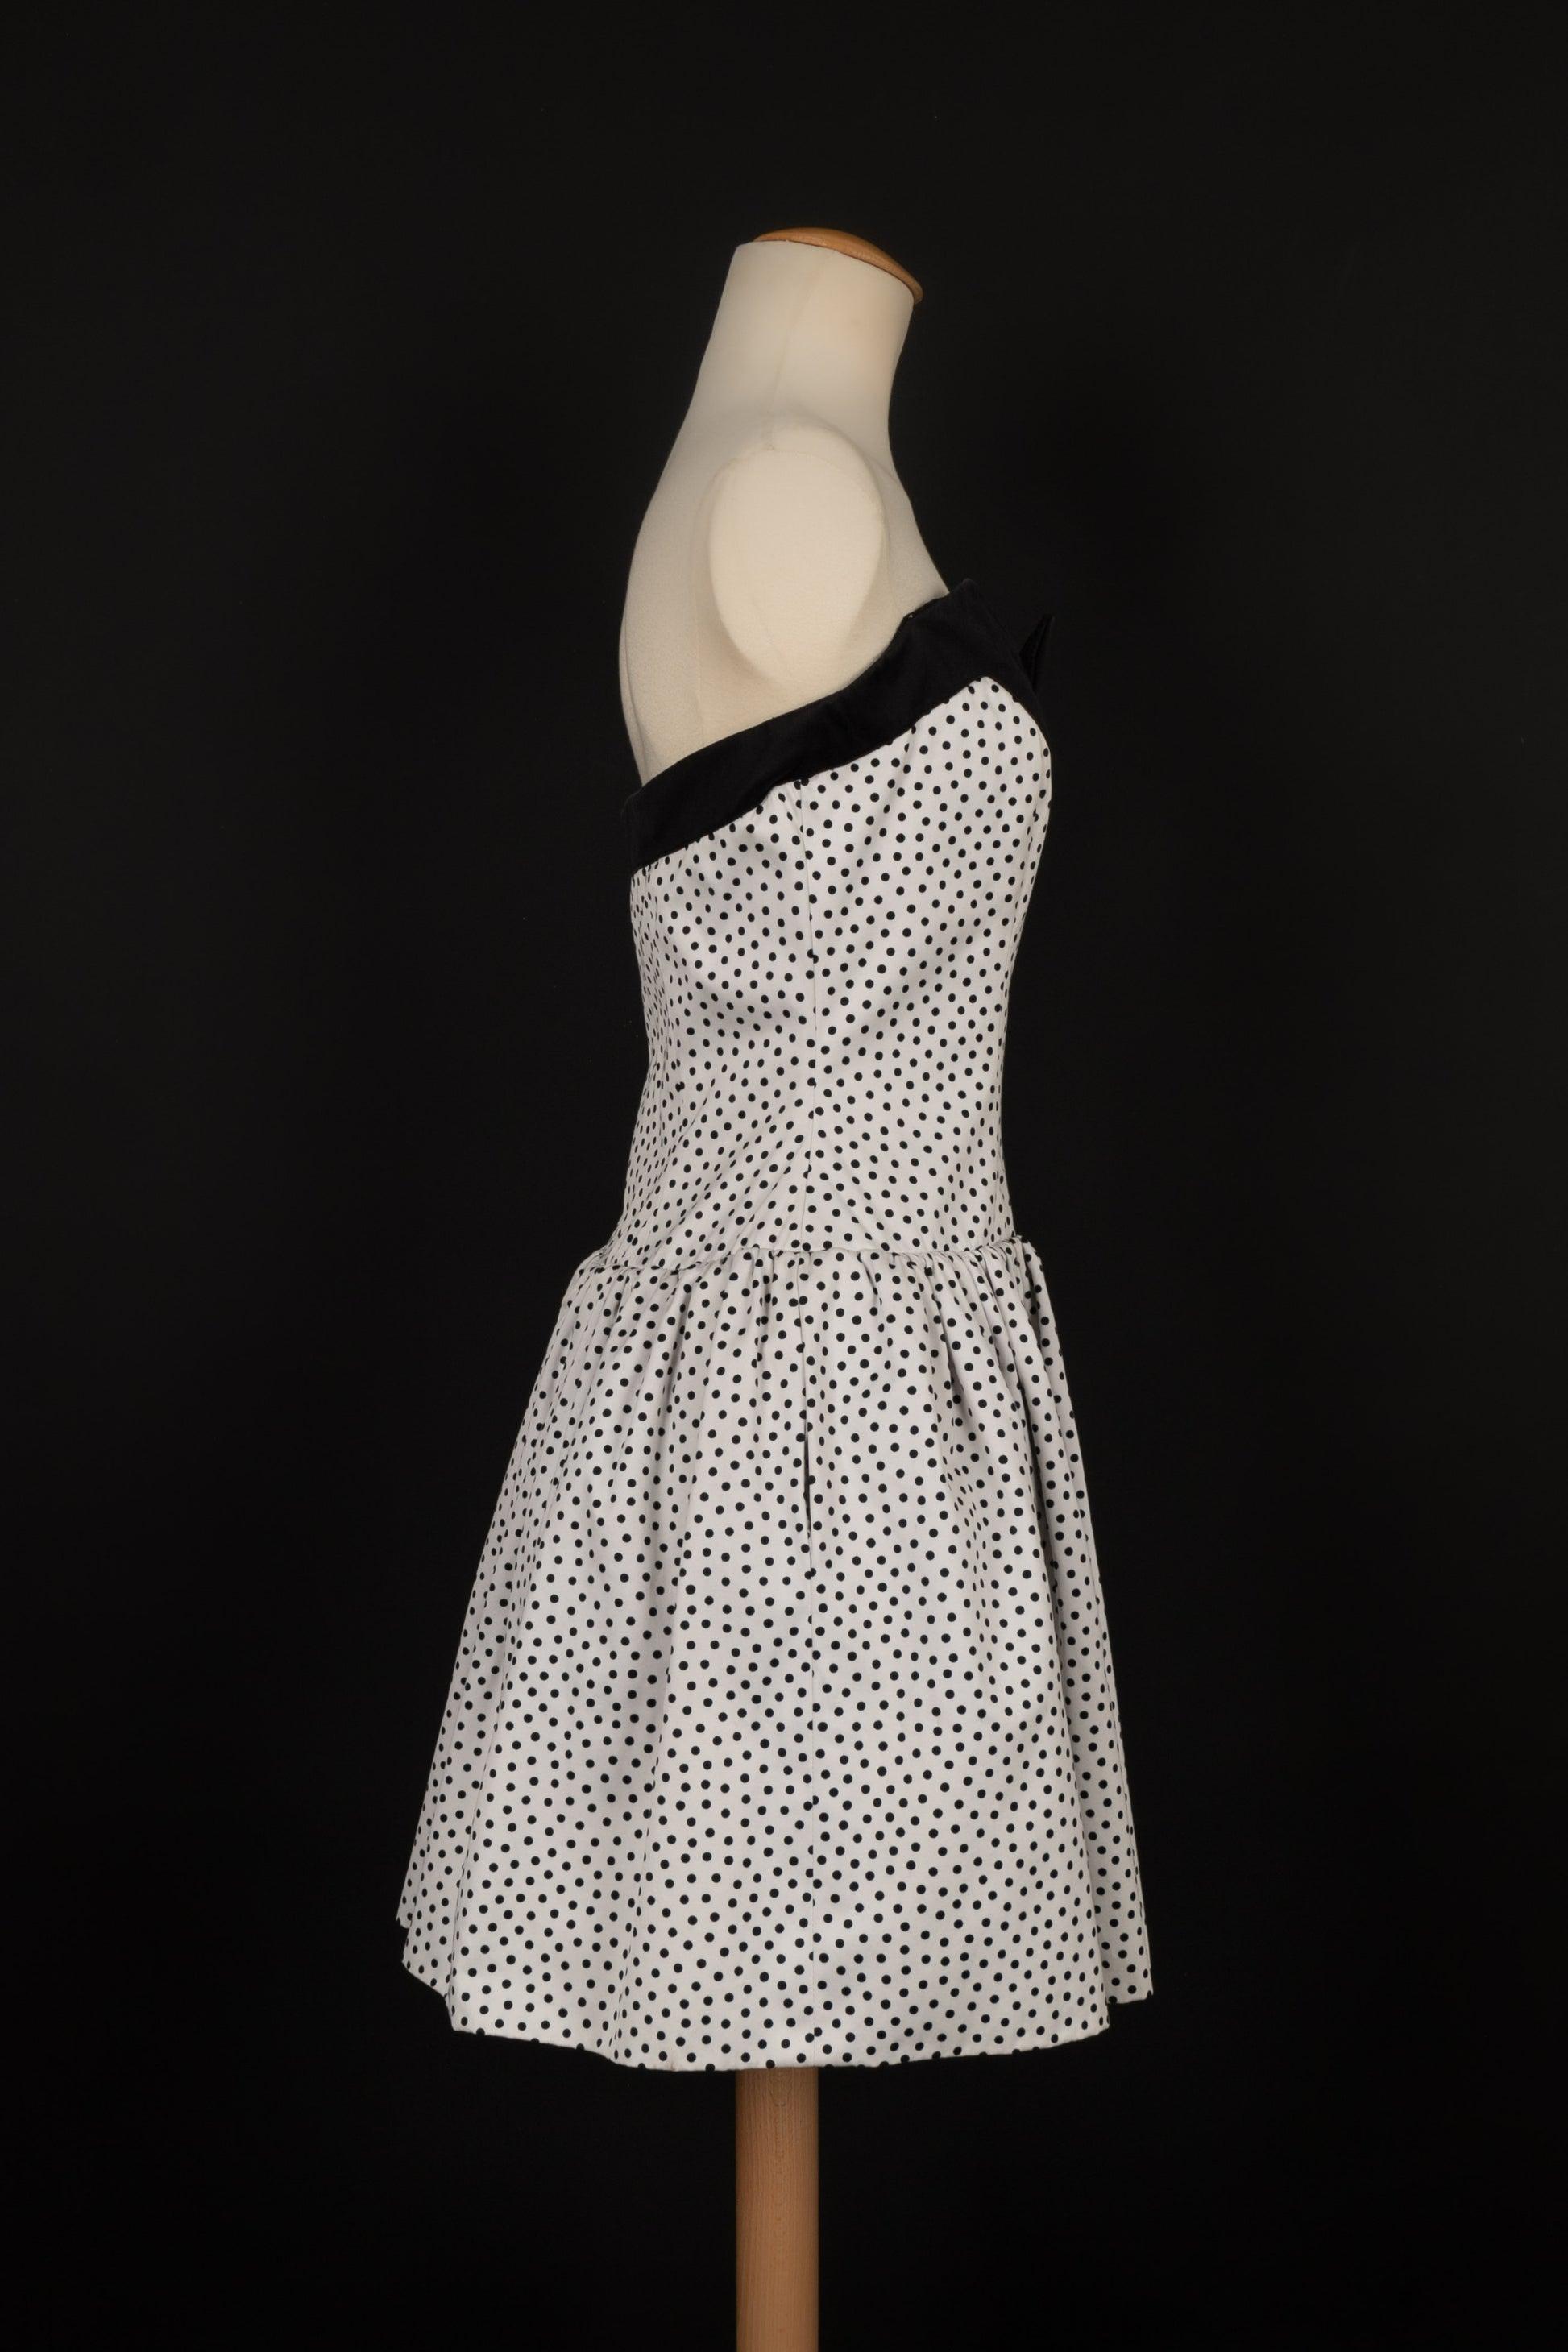 Lanvin - (Made in France) Black and white dotted cotton bustier dress. Indicated size 44FR, it fits a 40FR.

Additional information:
Condition: Very good condition
Dimensions: Chest: 45 cm - Waist: 37 cm - Length: 76 cm

Seller Reference: VR119